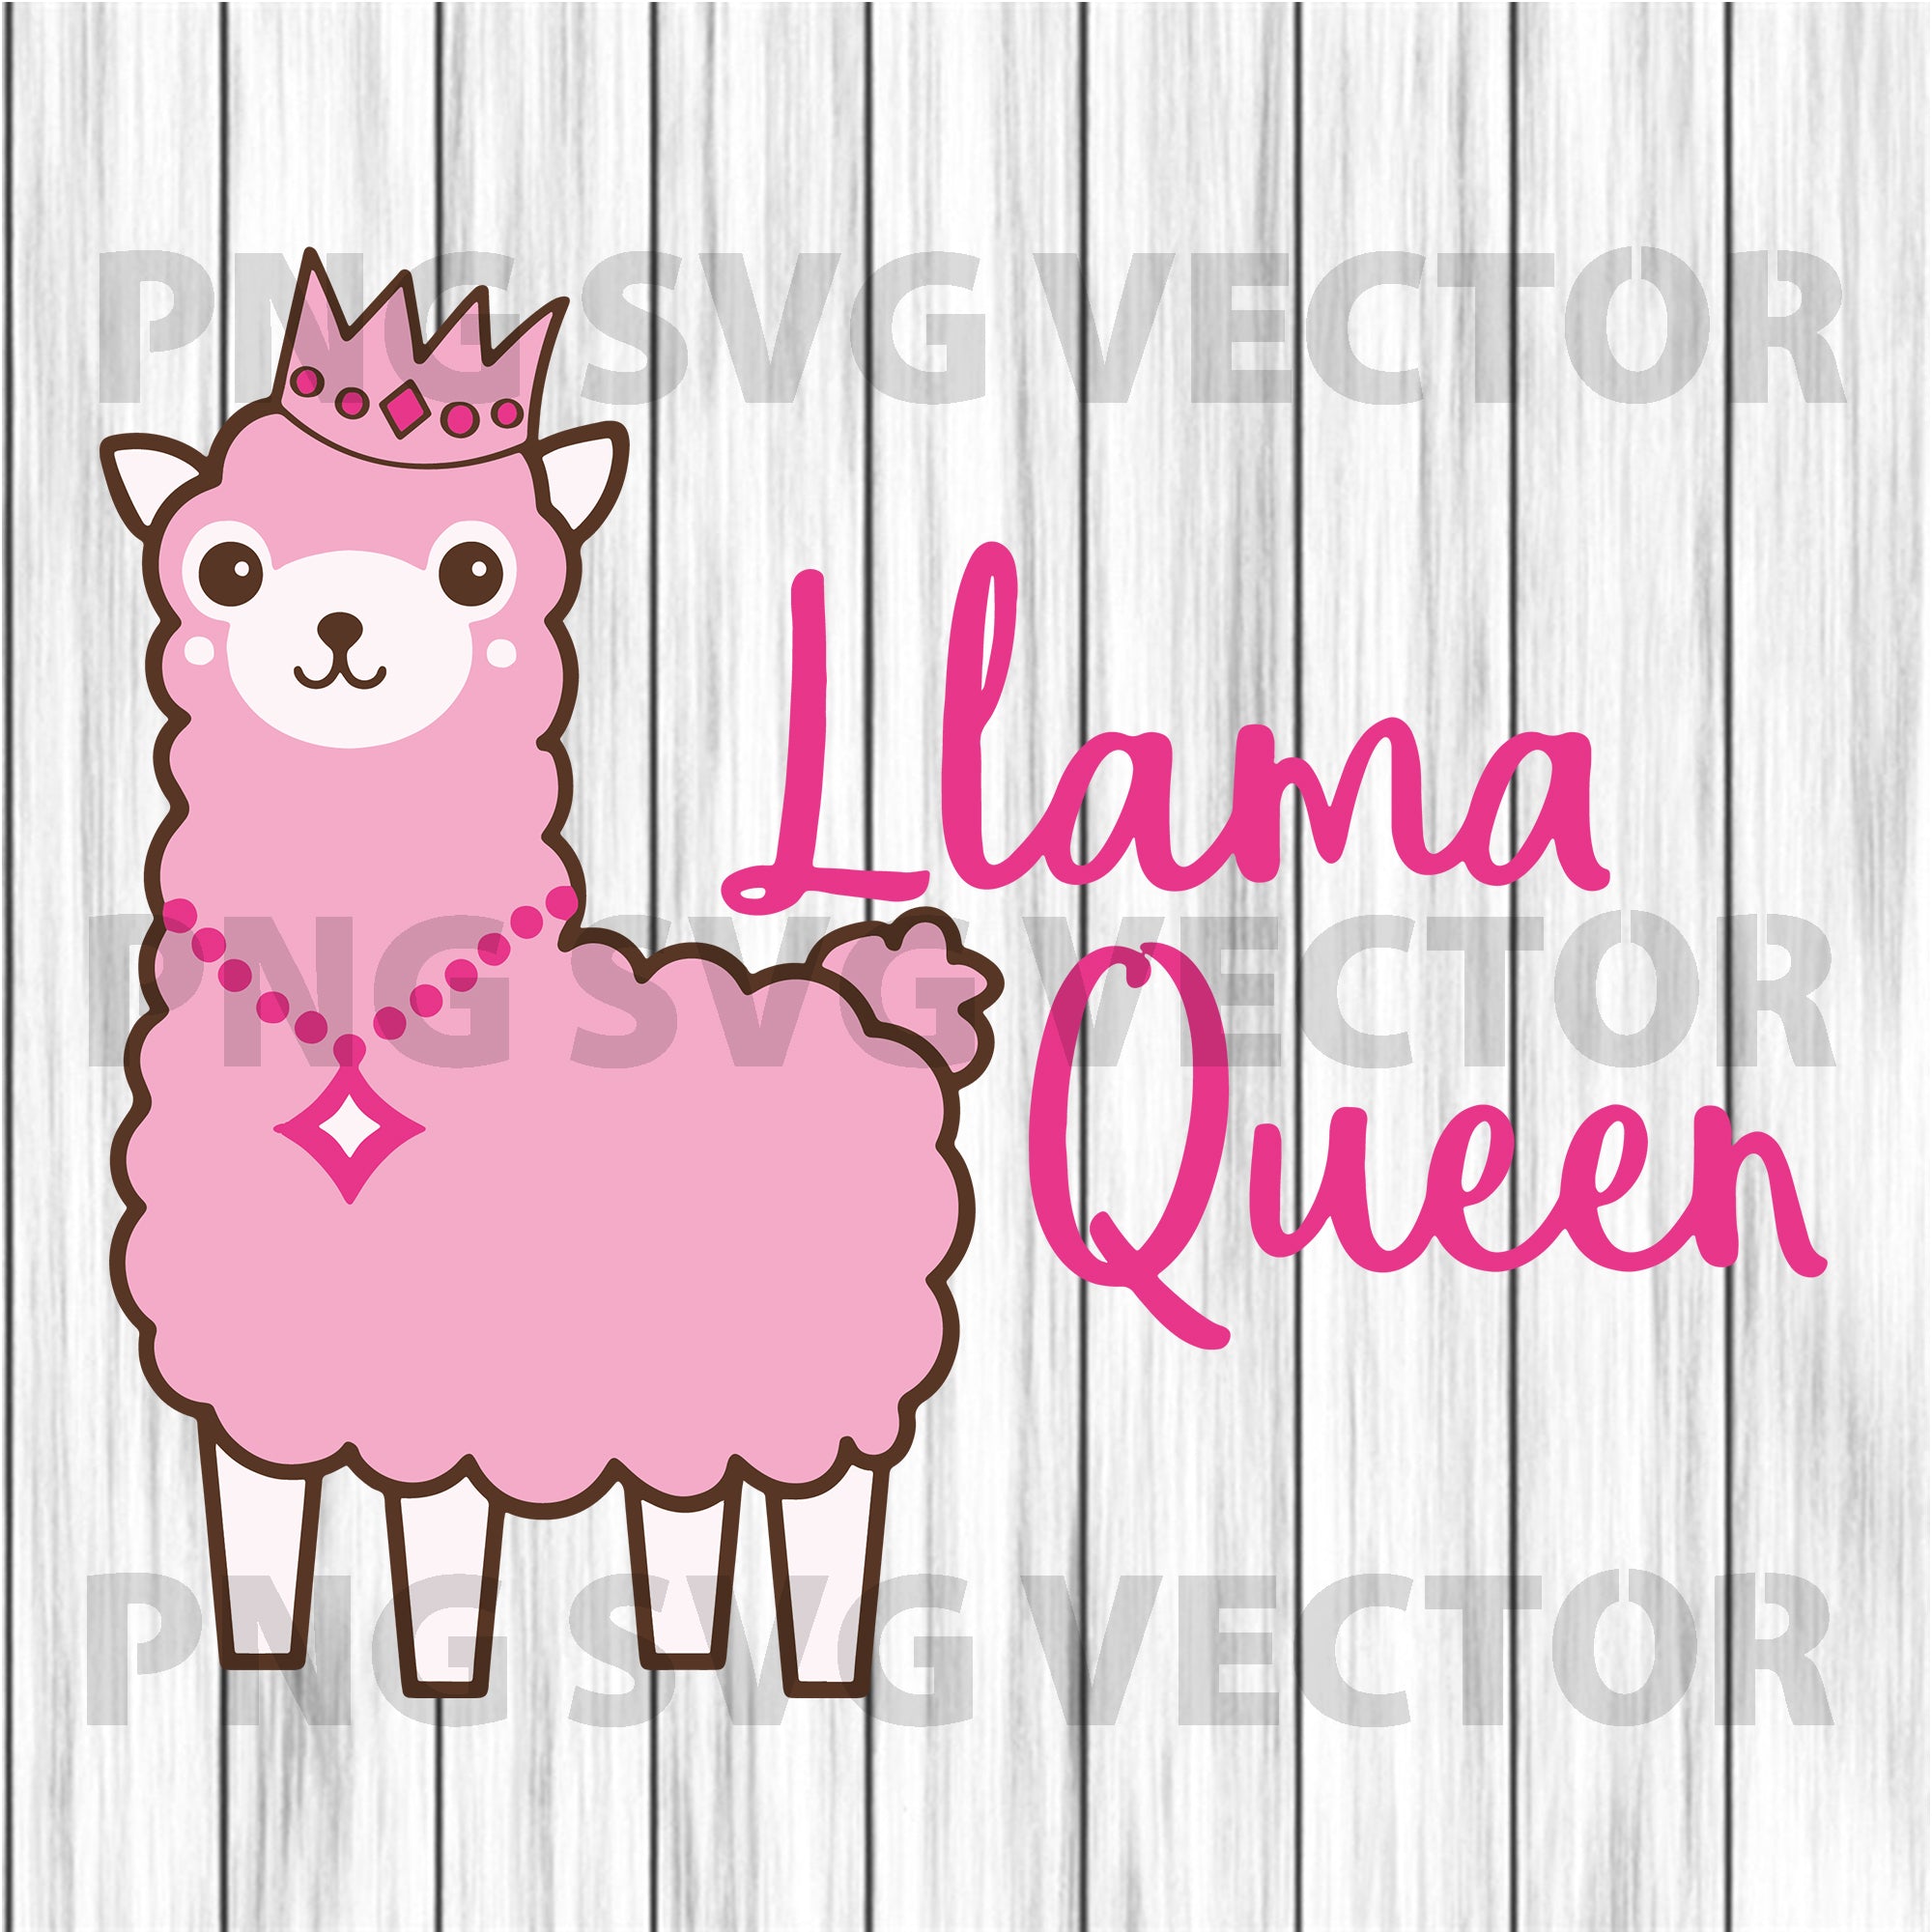 Download Vector Graphics Digital Clipart Cute Baby Llama Alpacca Svg Cut File For Cricut And Silhouette Clip Art Art Collectibles